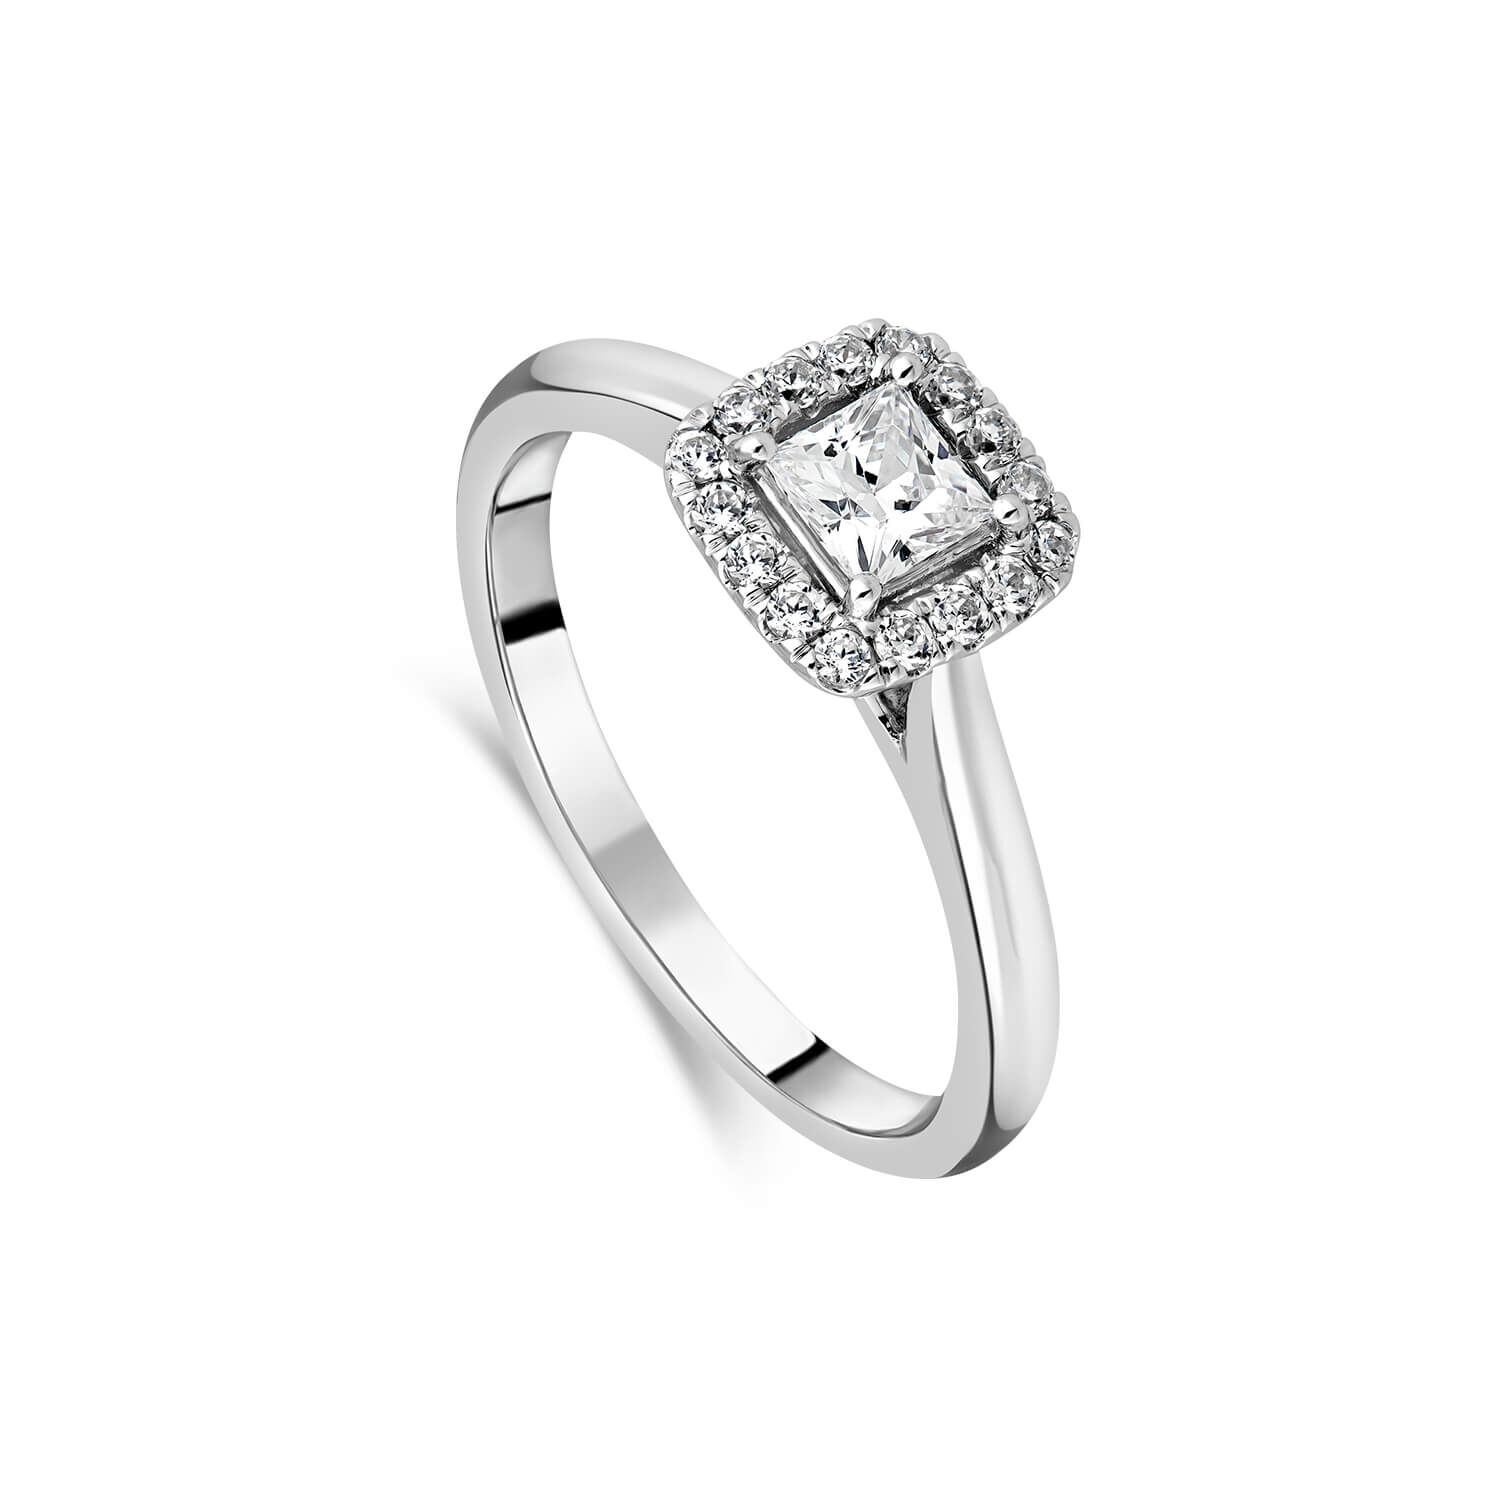 Northern Star 0.37ct Diamond 18ct White Gold Sides Ring at Fraser Hart